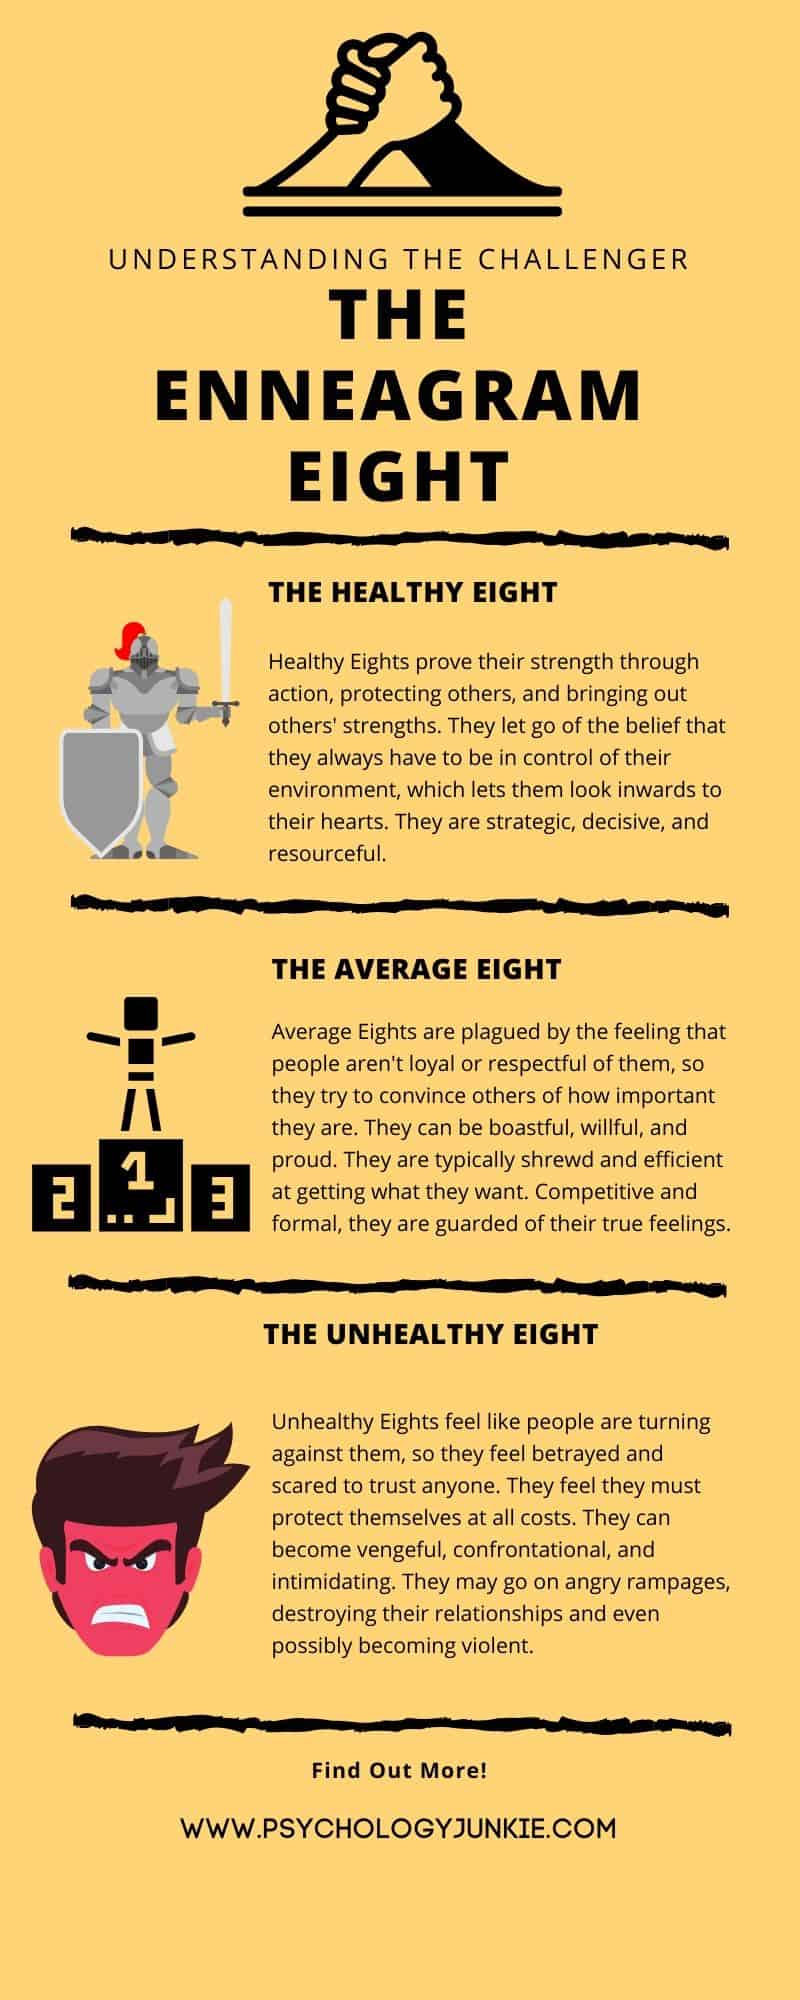 An infographic about the Enneagram 8 personality type at unhealthy, average, and healthy levels of maturity.